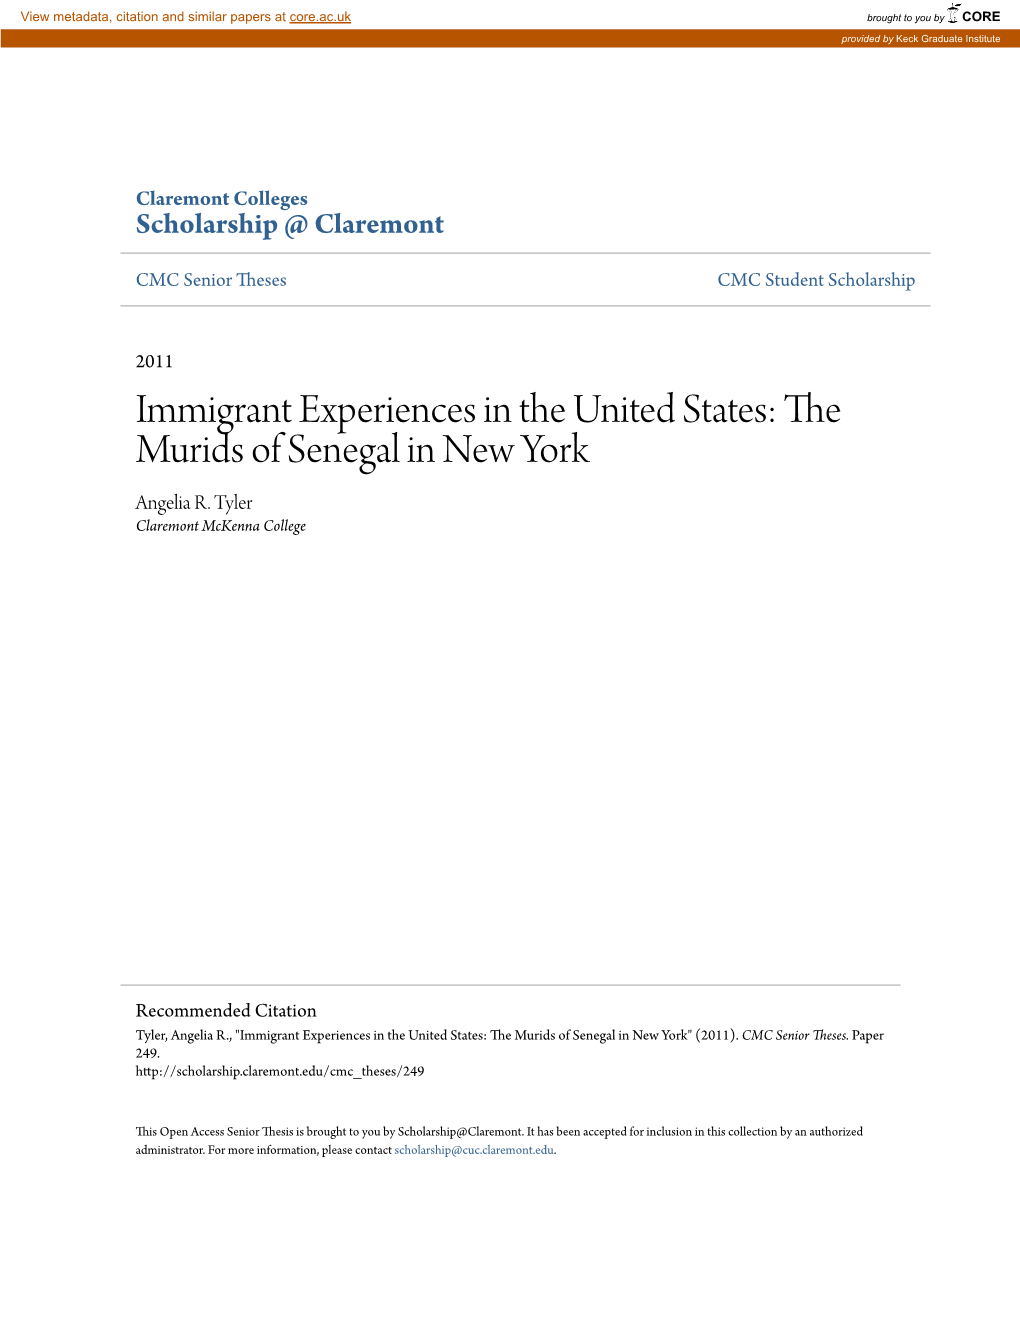 Immigrant Experiences in the United States: the Murids of Senegal in New York Angelia R